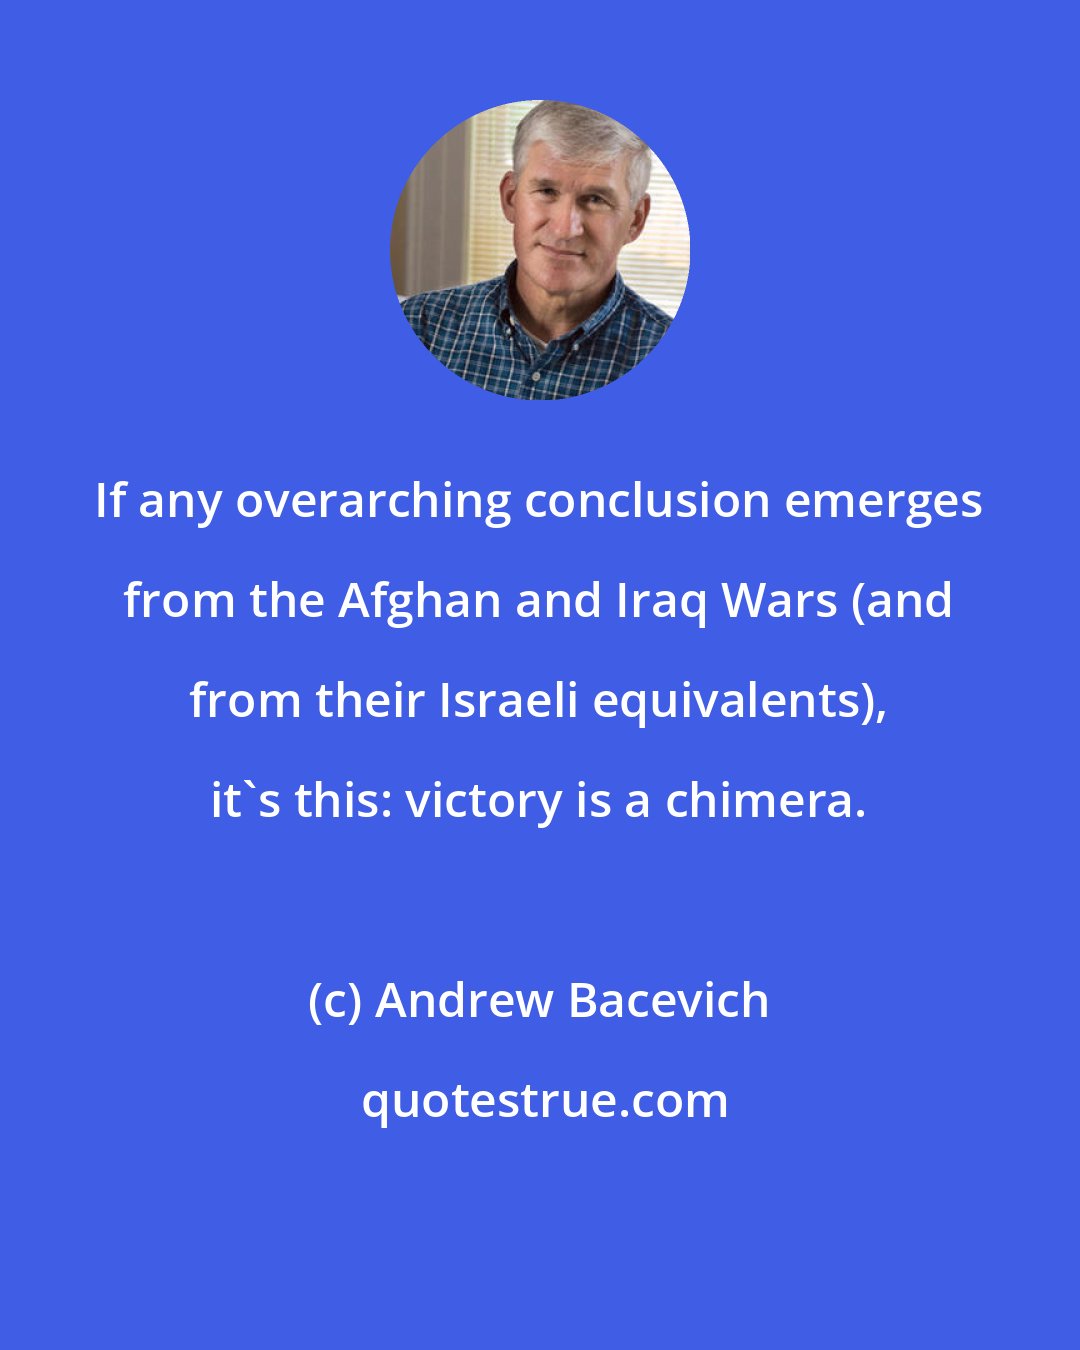 Andrew Bacevich: If any overarching conclusion emerges from the Afghan and Iraq Wars (and from their Israeli equivalents), it's this: victory is a chimera.